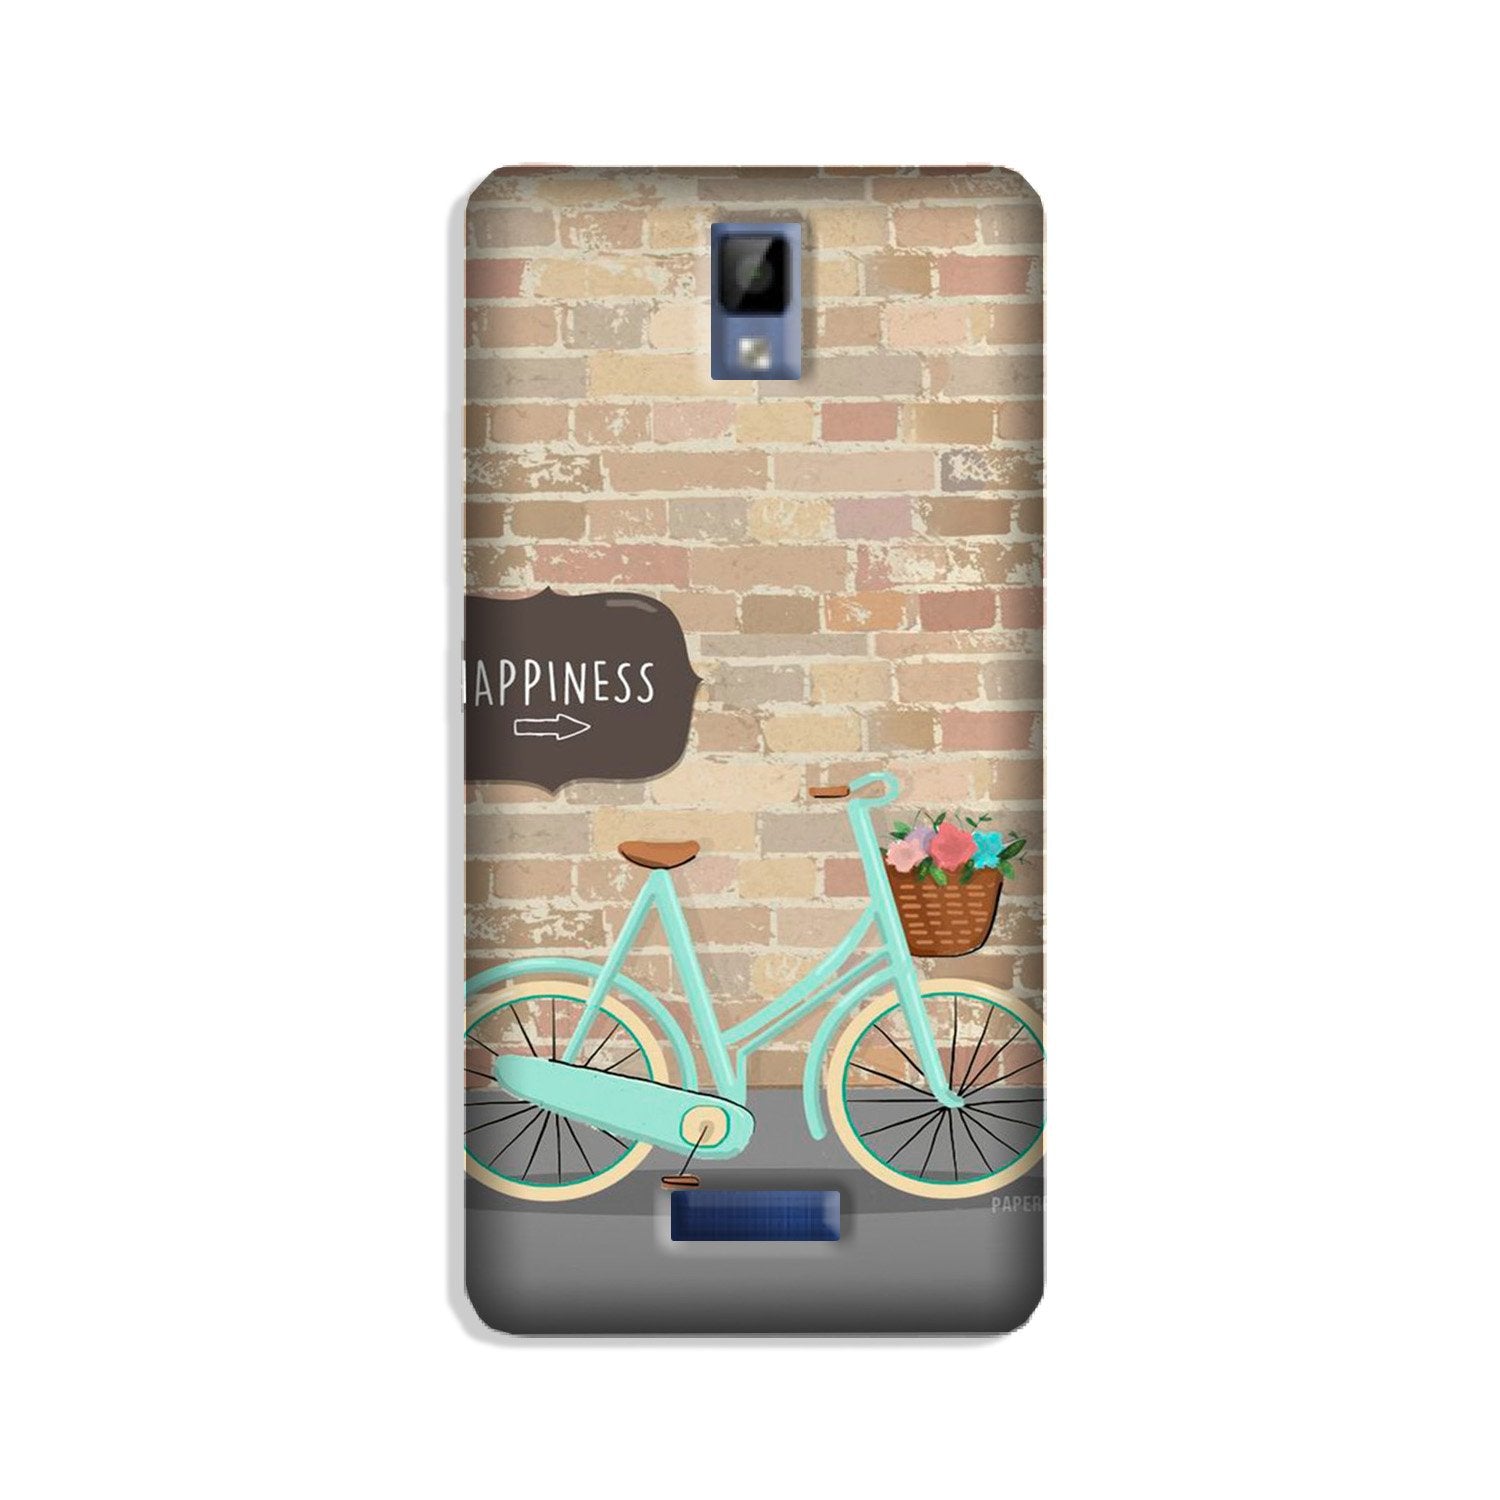 Happiness Case for Gionee P7